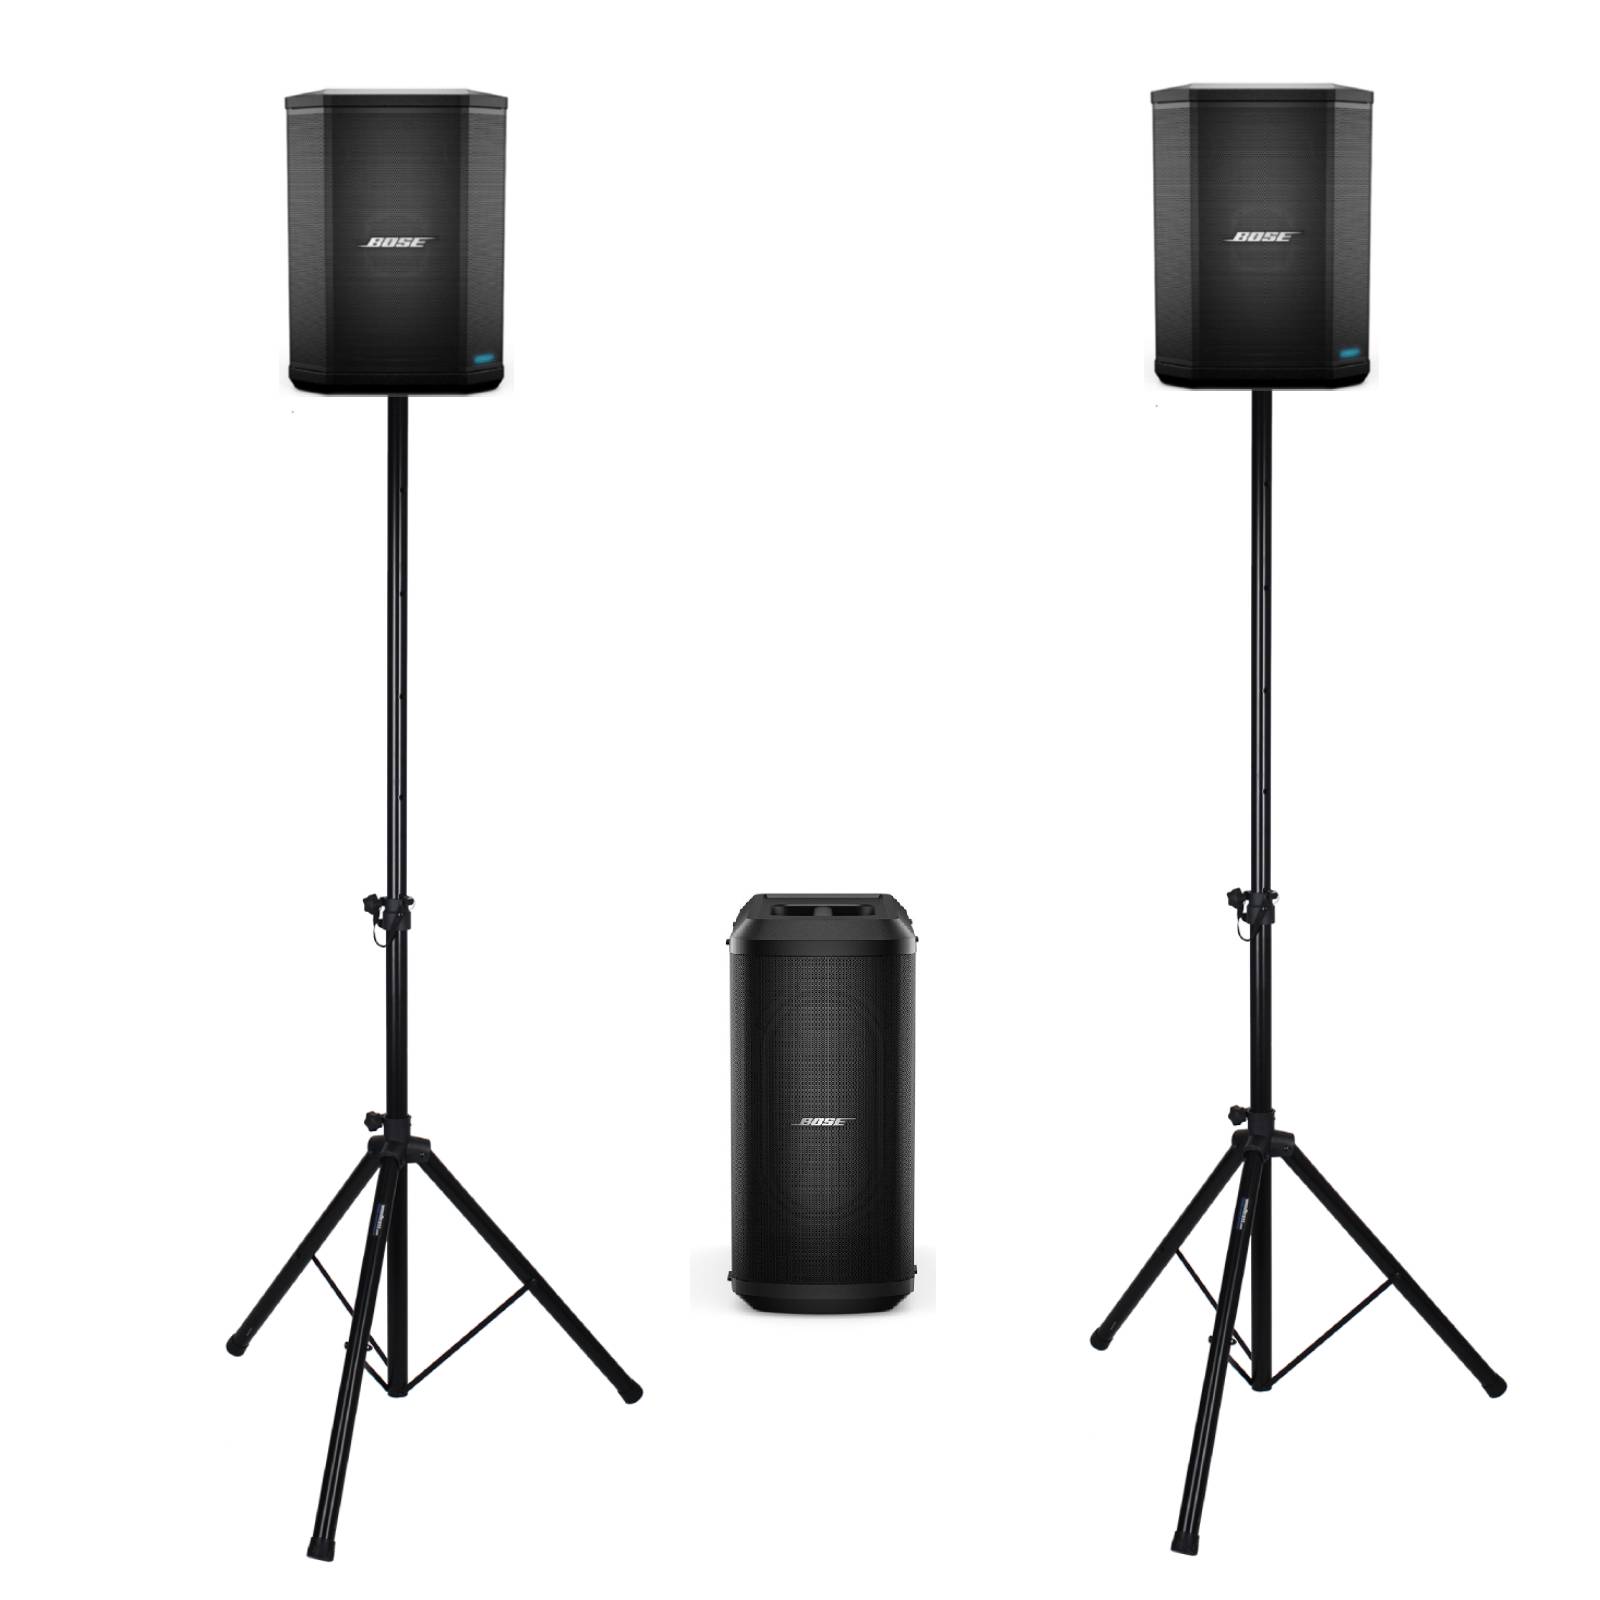 SUB2 PROFESSIONAL PRO BATTERIE + S1 SYSTEM MIT + BOSE PACK KABELS + STANDS